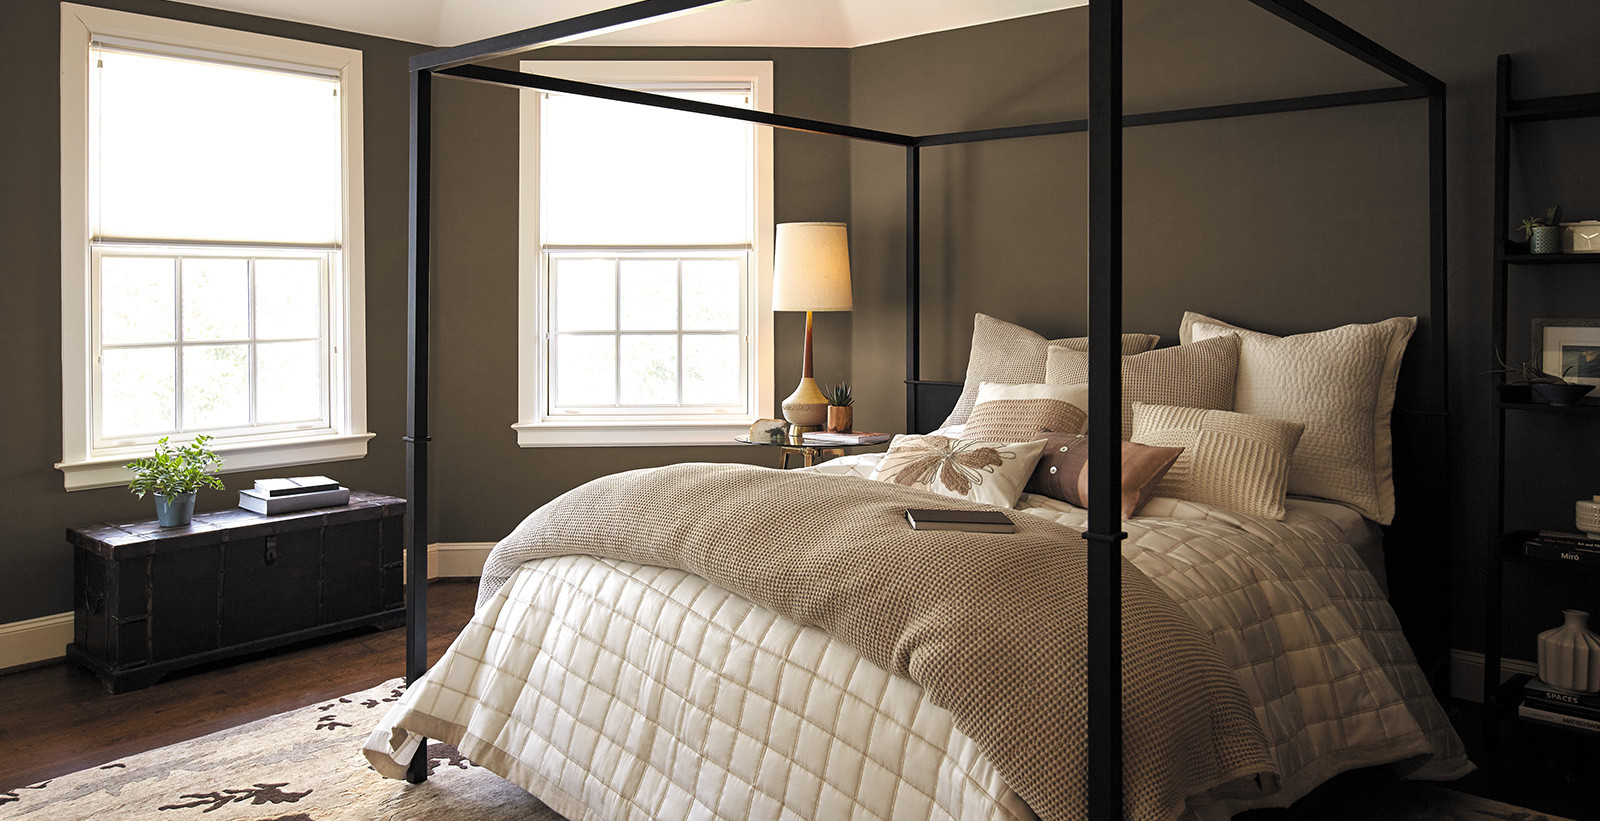 Behr Bedroom Paint Colors
 fortable Bedroom Inspirational Paint Colors